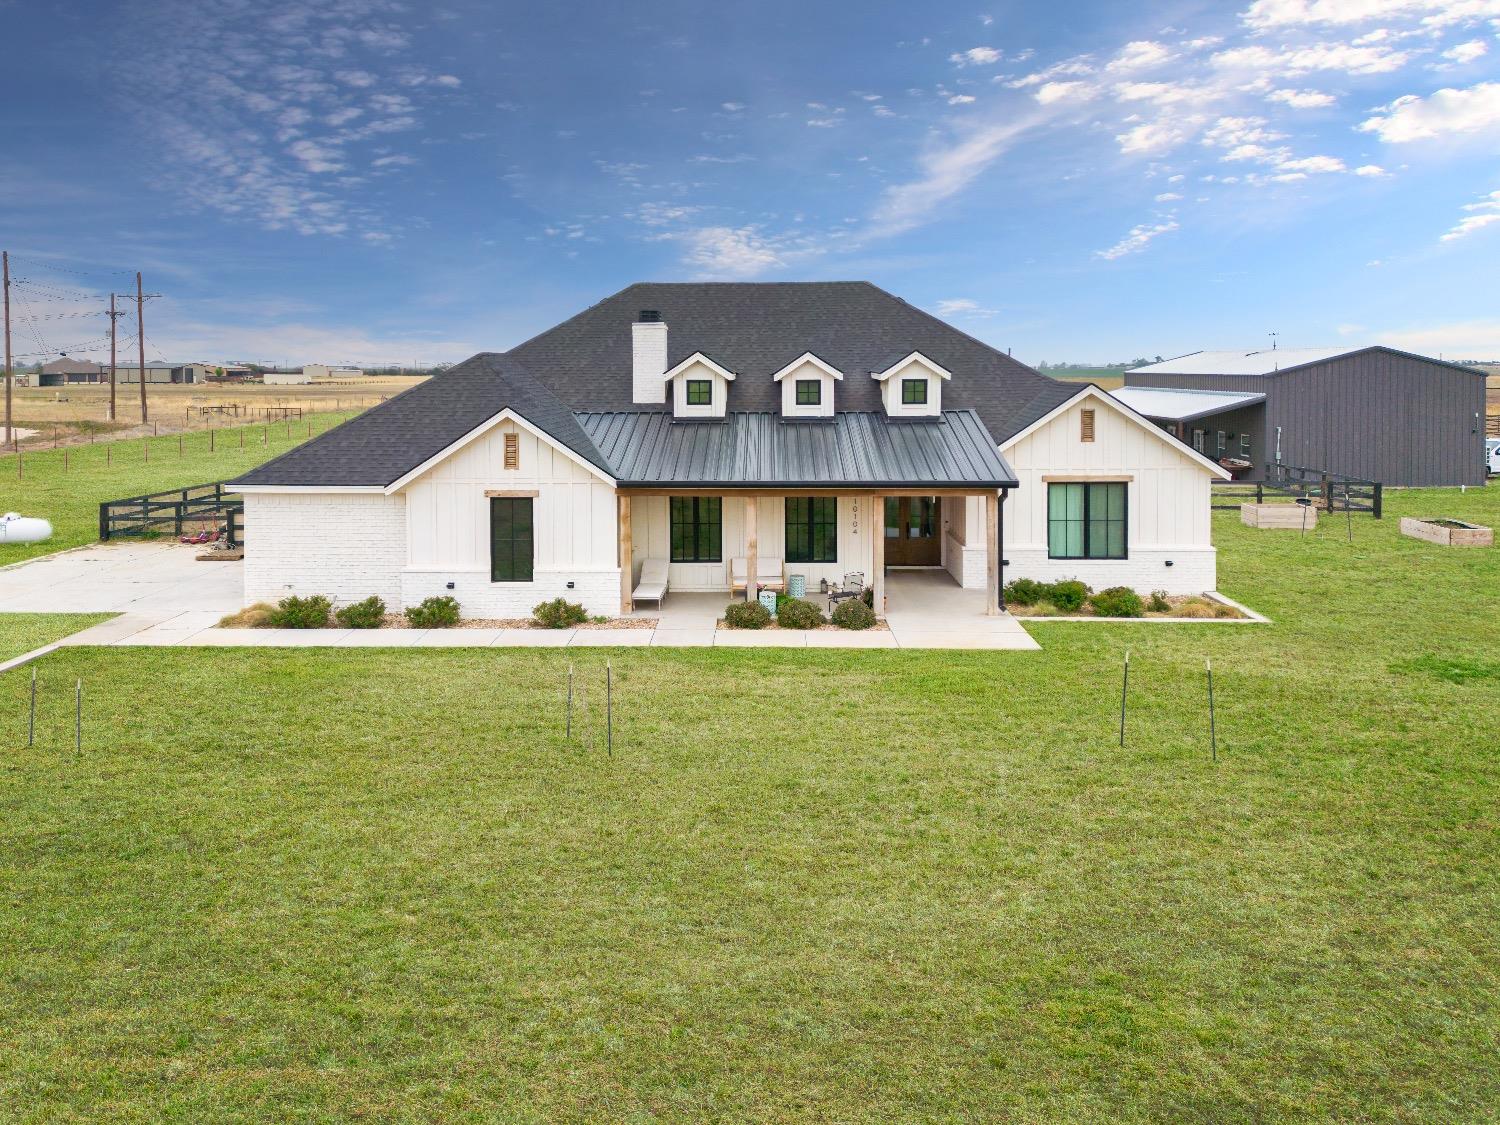 Welcome to your custom luxury farmhouse in Idalou, Texas! This spacious home features a 3,000 square foot main house and 1,400 square foot 2/1 apartment in the shop. A total of 5 bedrooms, 3.5 bathrooms, an office, 3 living areas, oversized 2 car garage and 10 acres to spread out & enjoy the country. The best of finishes include a Z-line black stainless dual fuel range, commercial grade fridge/freezer, floating shelves, hardwood floors throughout, two fireplaces, herringbone brick paver flooring in master closet & laundry, isolated master suite with restored clawfoot tub, an 1,800 square foot shop with a 2 bedroom 1 bathroom apartment with 3 mini-split HVAC units. Built by Toogood Homes, this property offers a side entry garage and a true farmhouse design with a second living room and brick reveal walls and appointments. Irrigation in the front and back yard with a covered patio on the shop. Idalou ISD and just minutes from town. Schedule your showing today!